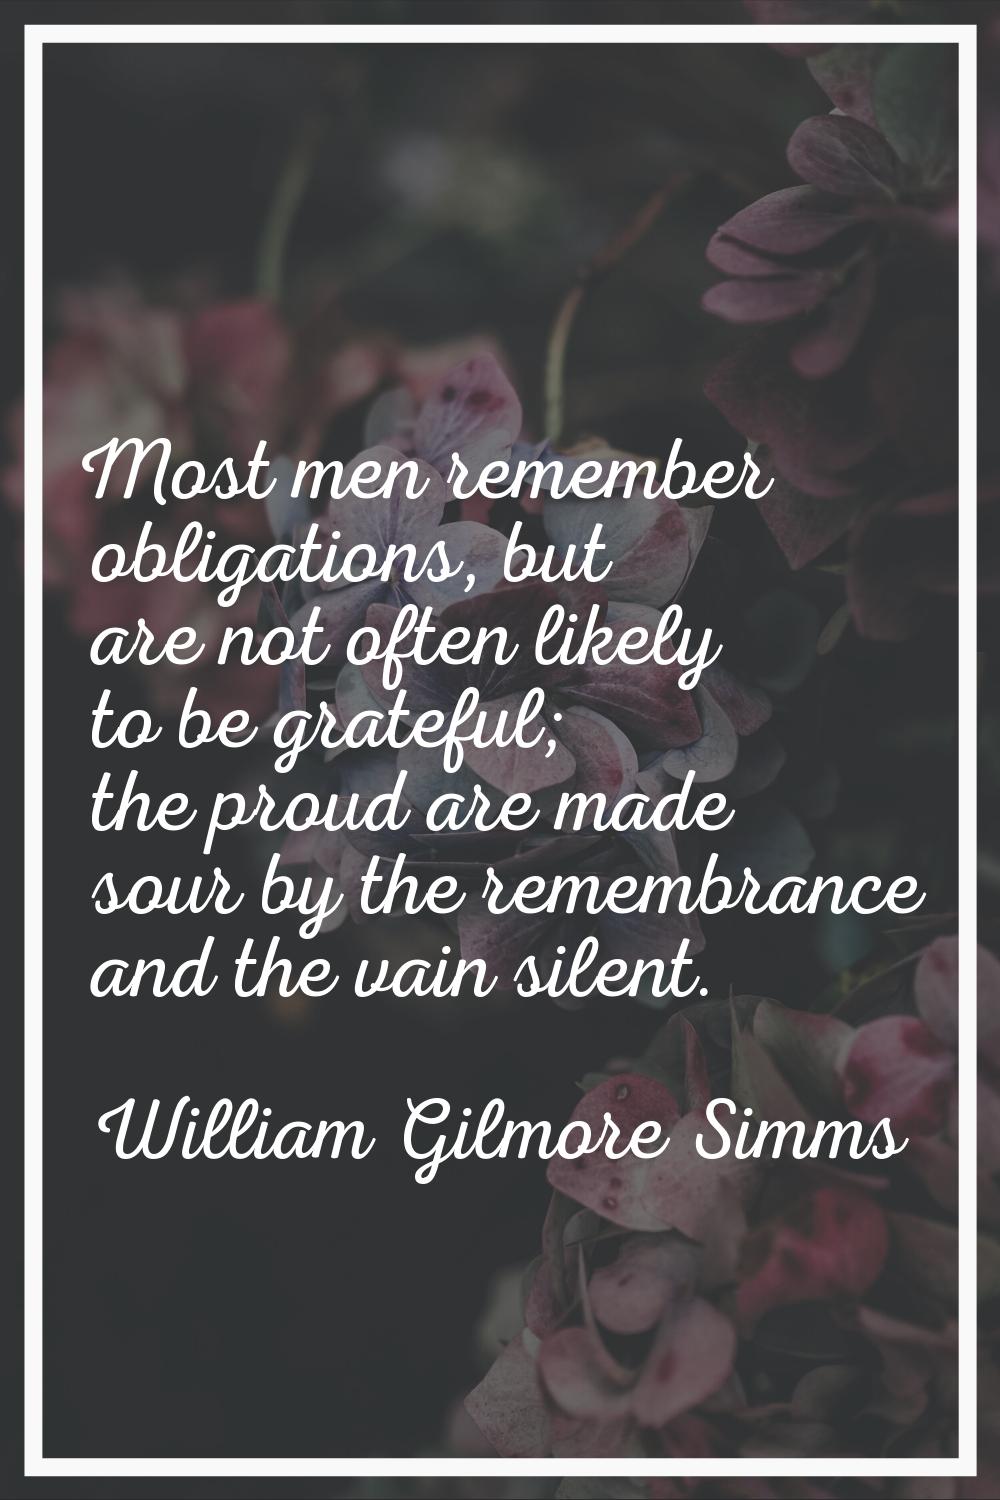 Most men remember obligations, but are not often likely to be grateful; the proud are made sour by 